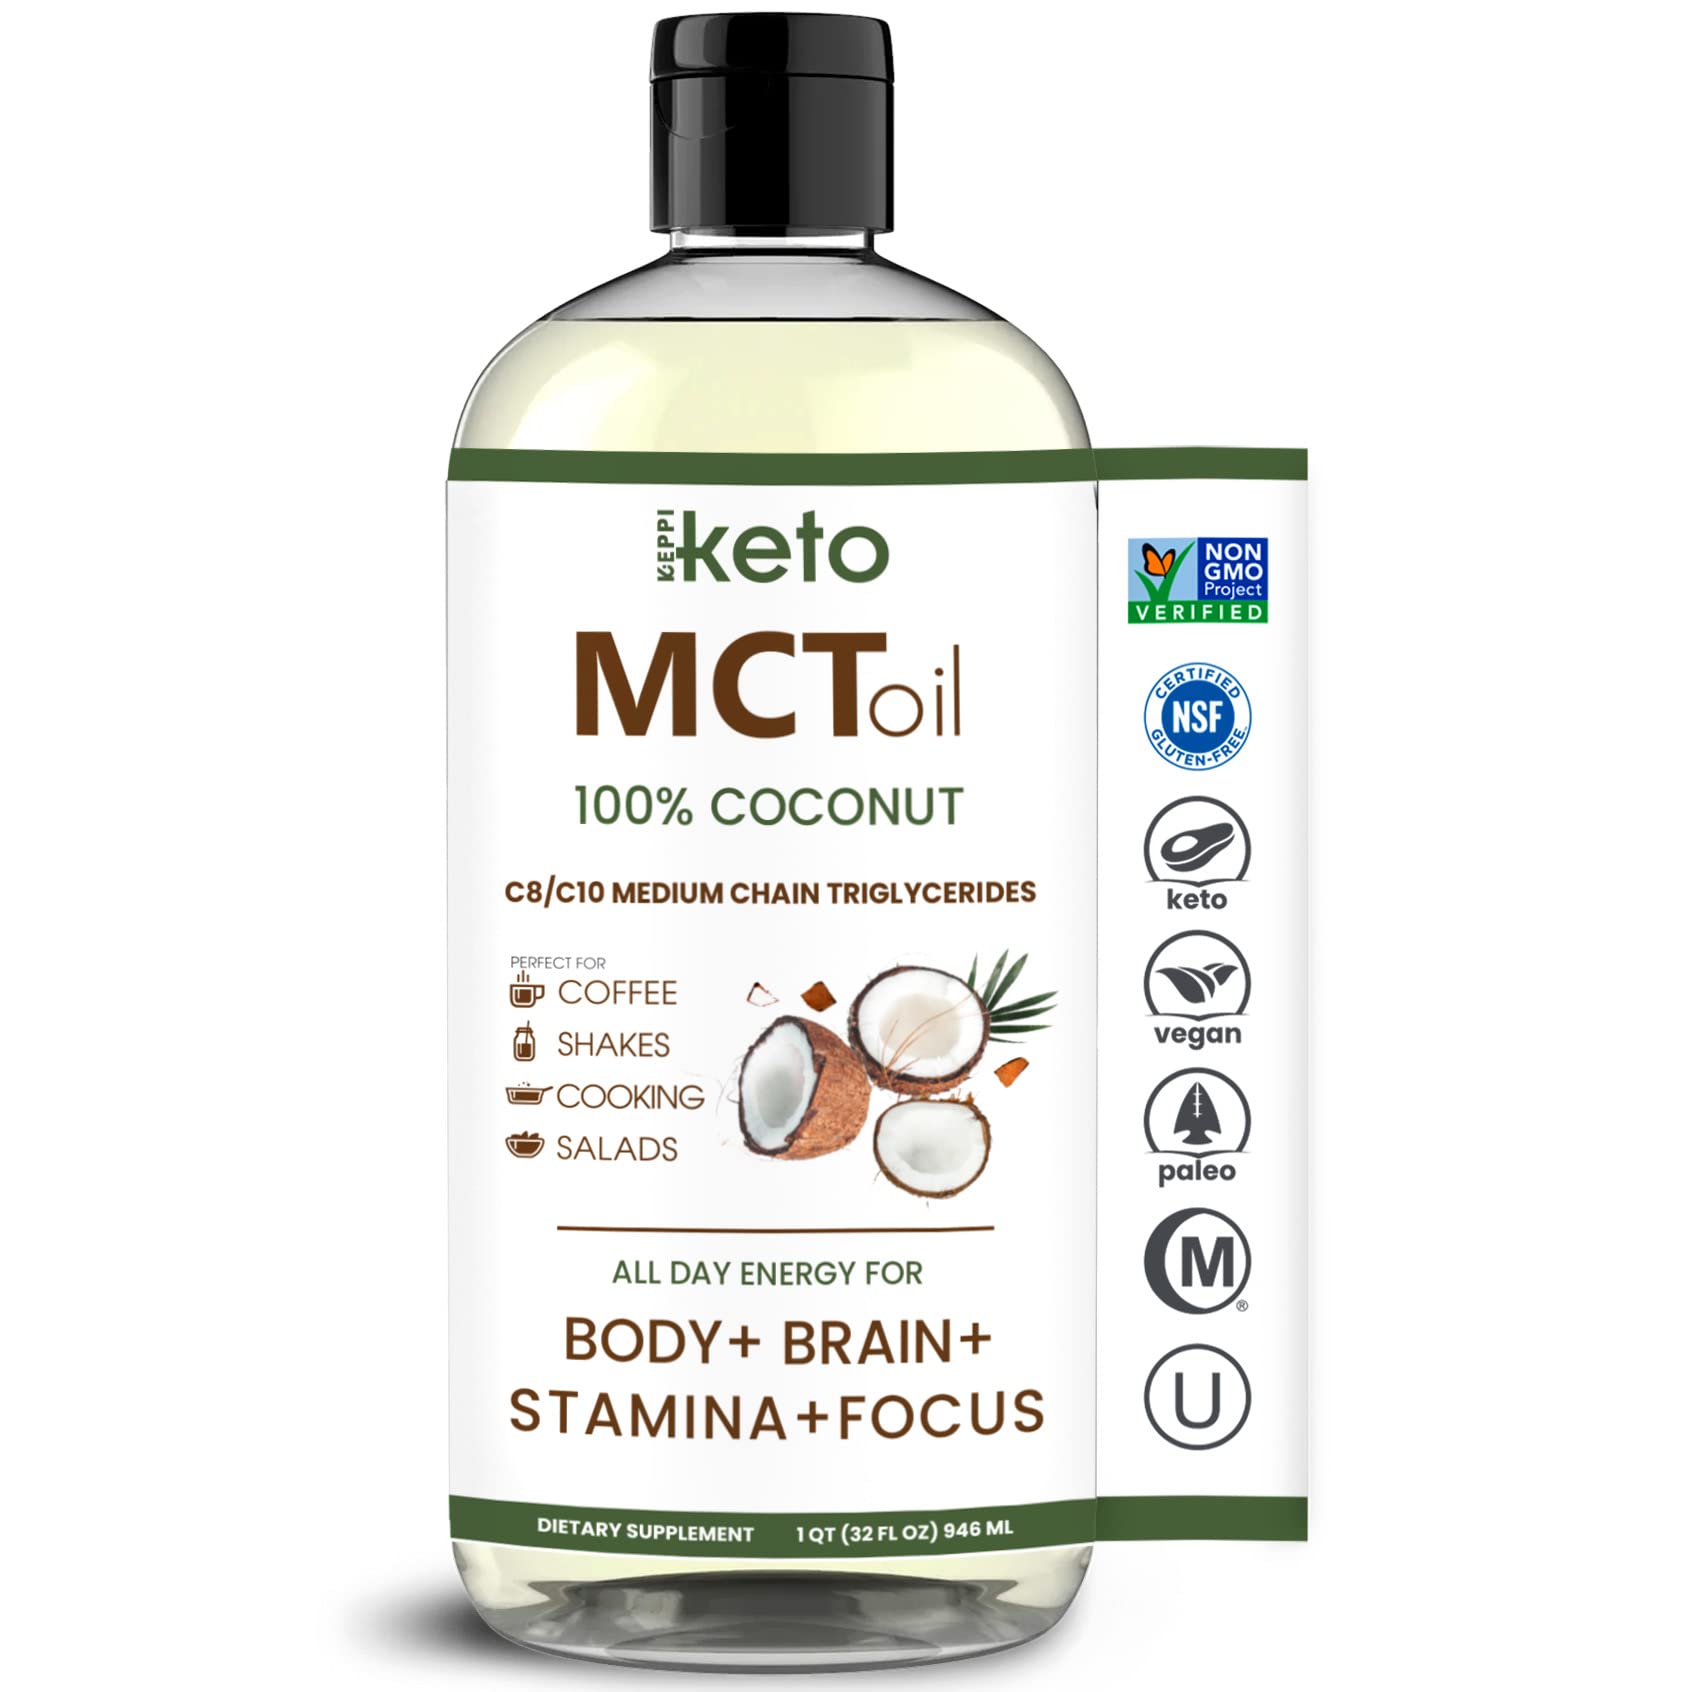 Book Cover Keppi MCT Oil Keto | 32 oz Flavorless 100% Coconut Oil | 60% C8 | Non-GMO, Certified Gluten-Free, MCT Keto Oil | Mixes Easily in Coffee & Smoothies | MCT Wellness | No Palm Oil | Vegan MCT Oil